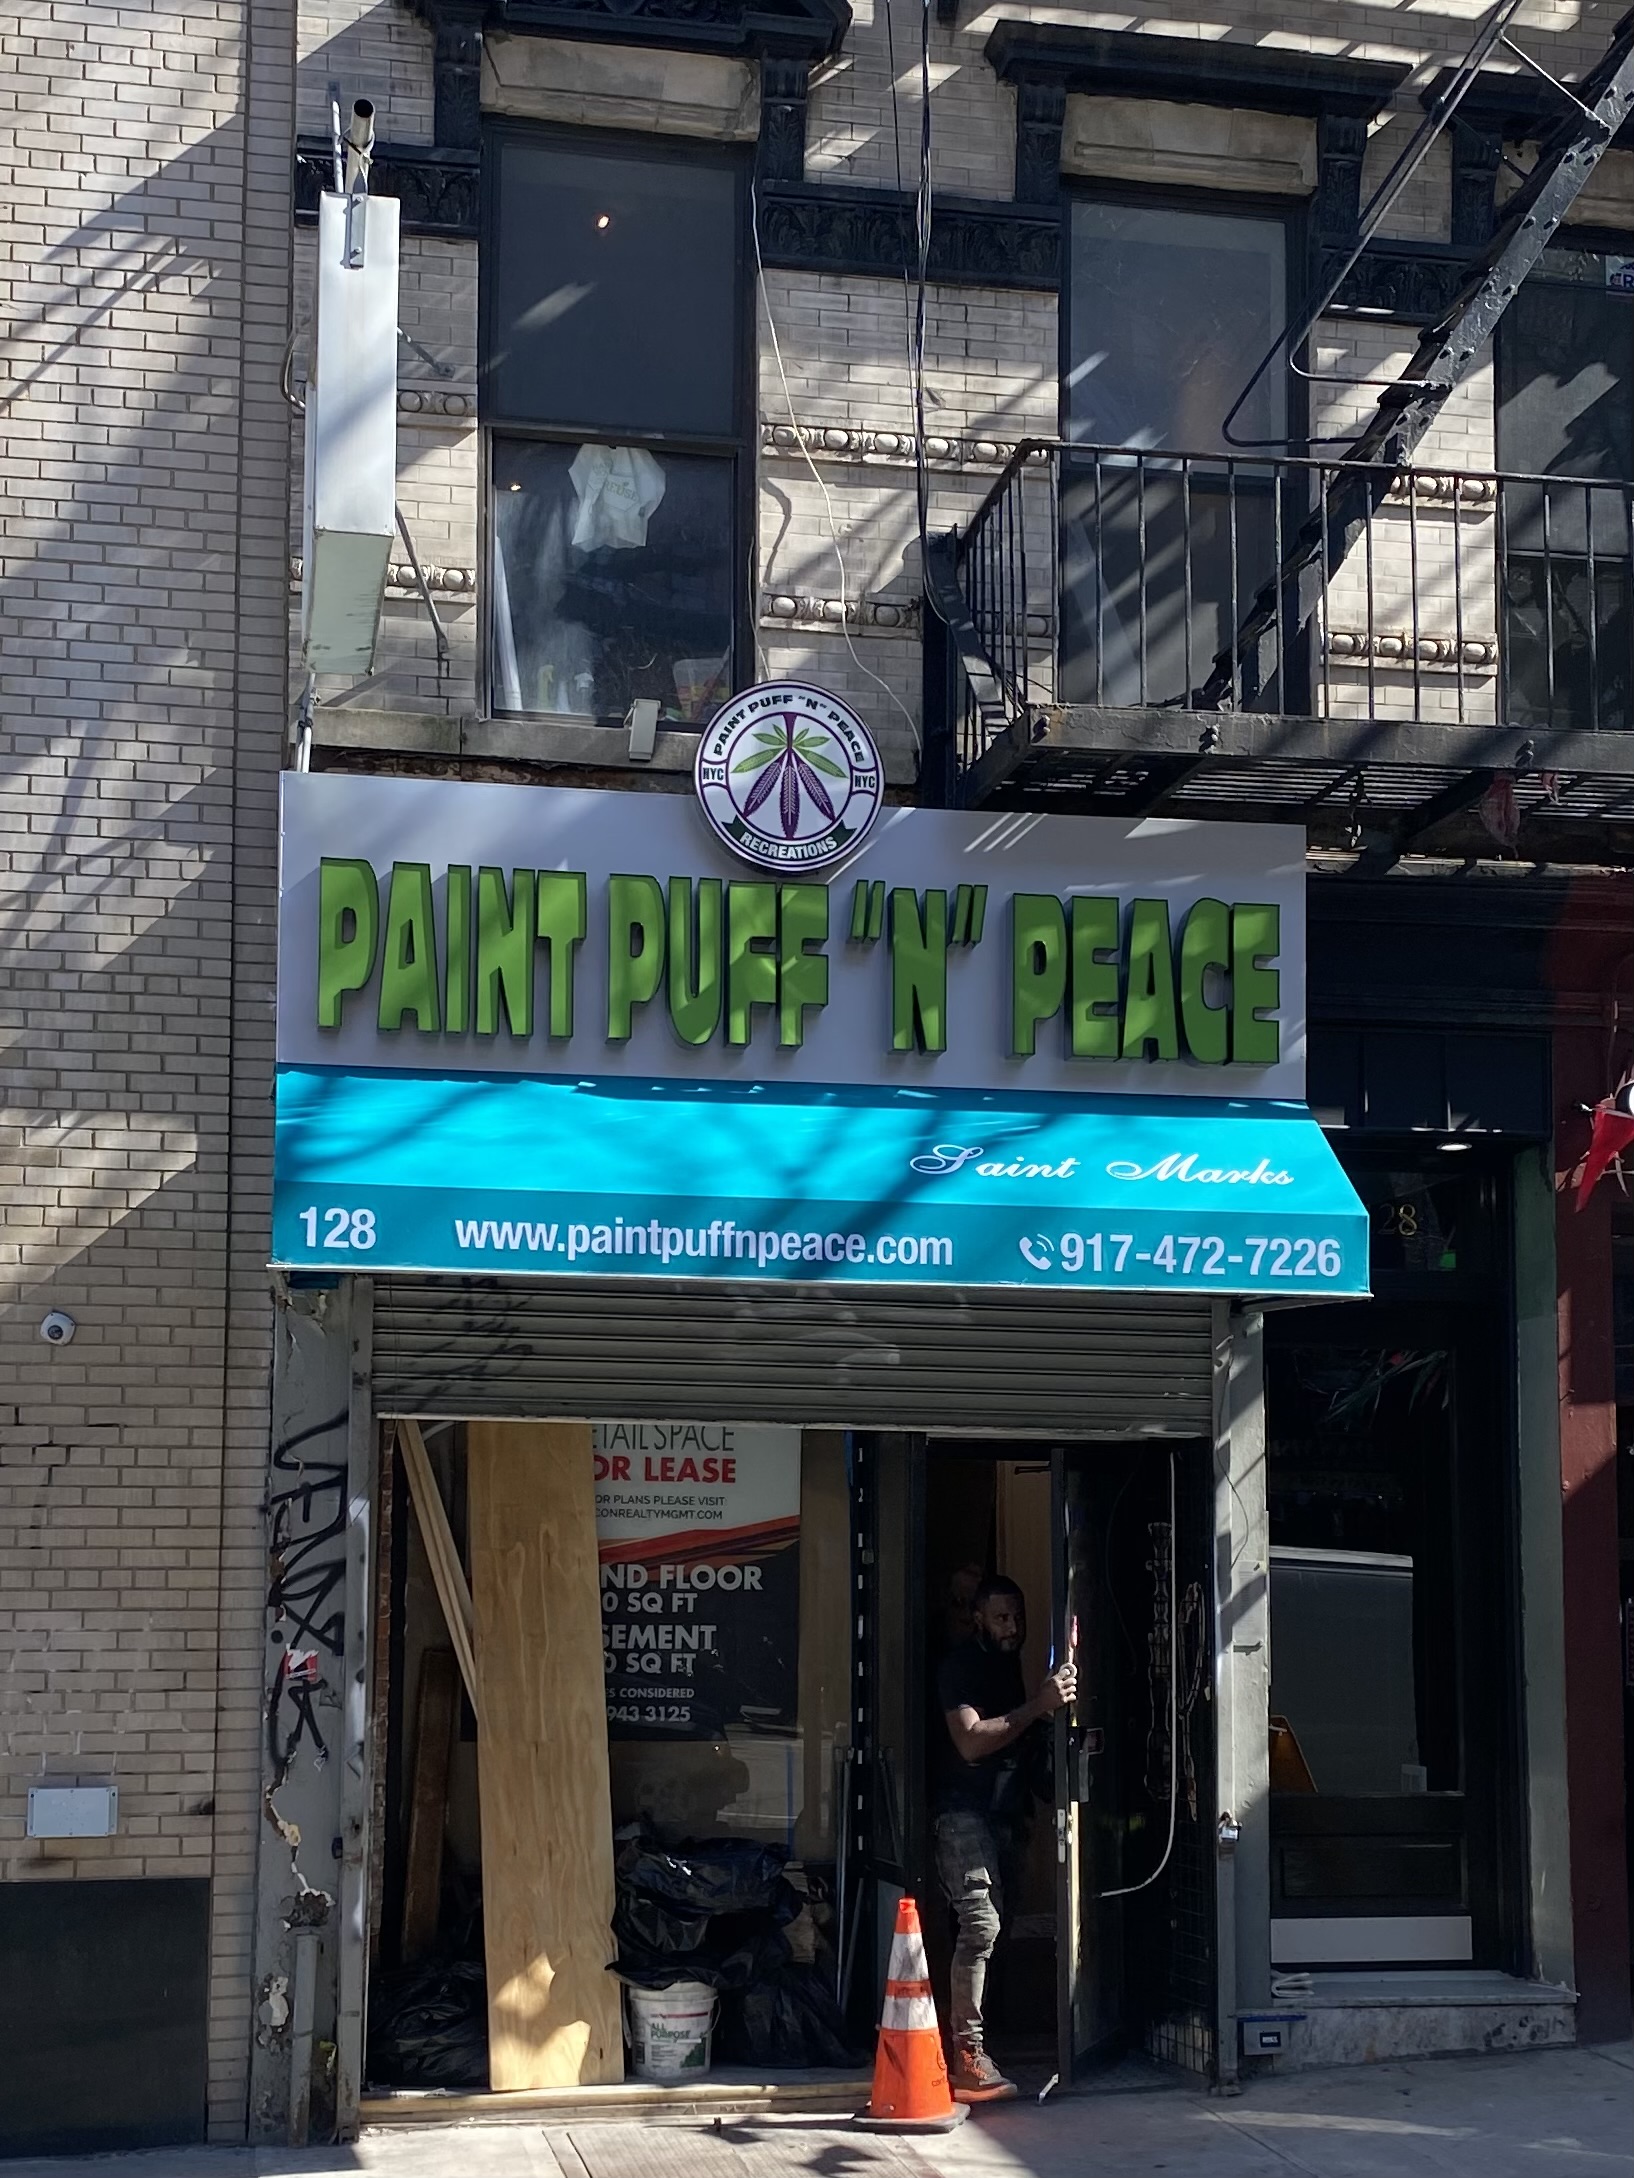 EV Grieve: Paint Puff 'N' Peace coming soon to 2nd Avenue